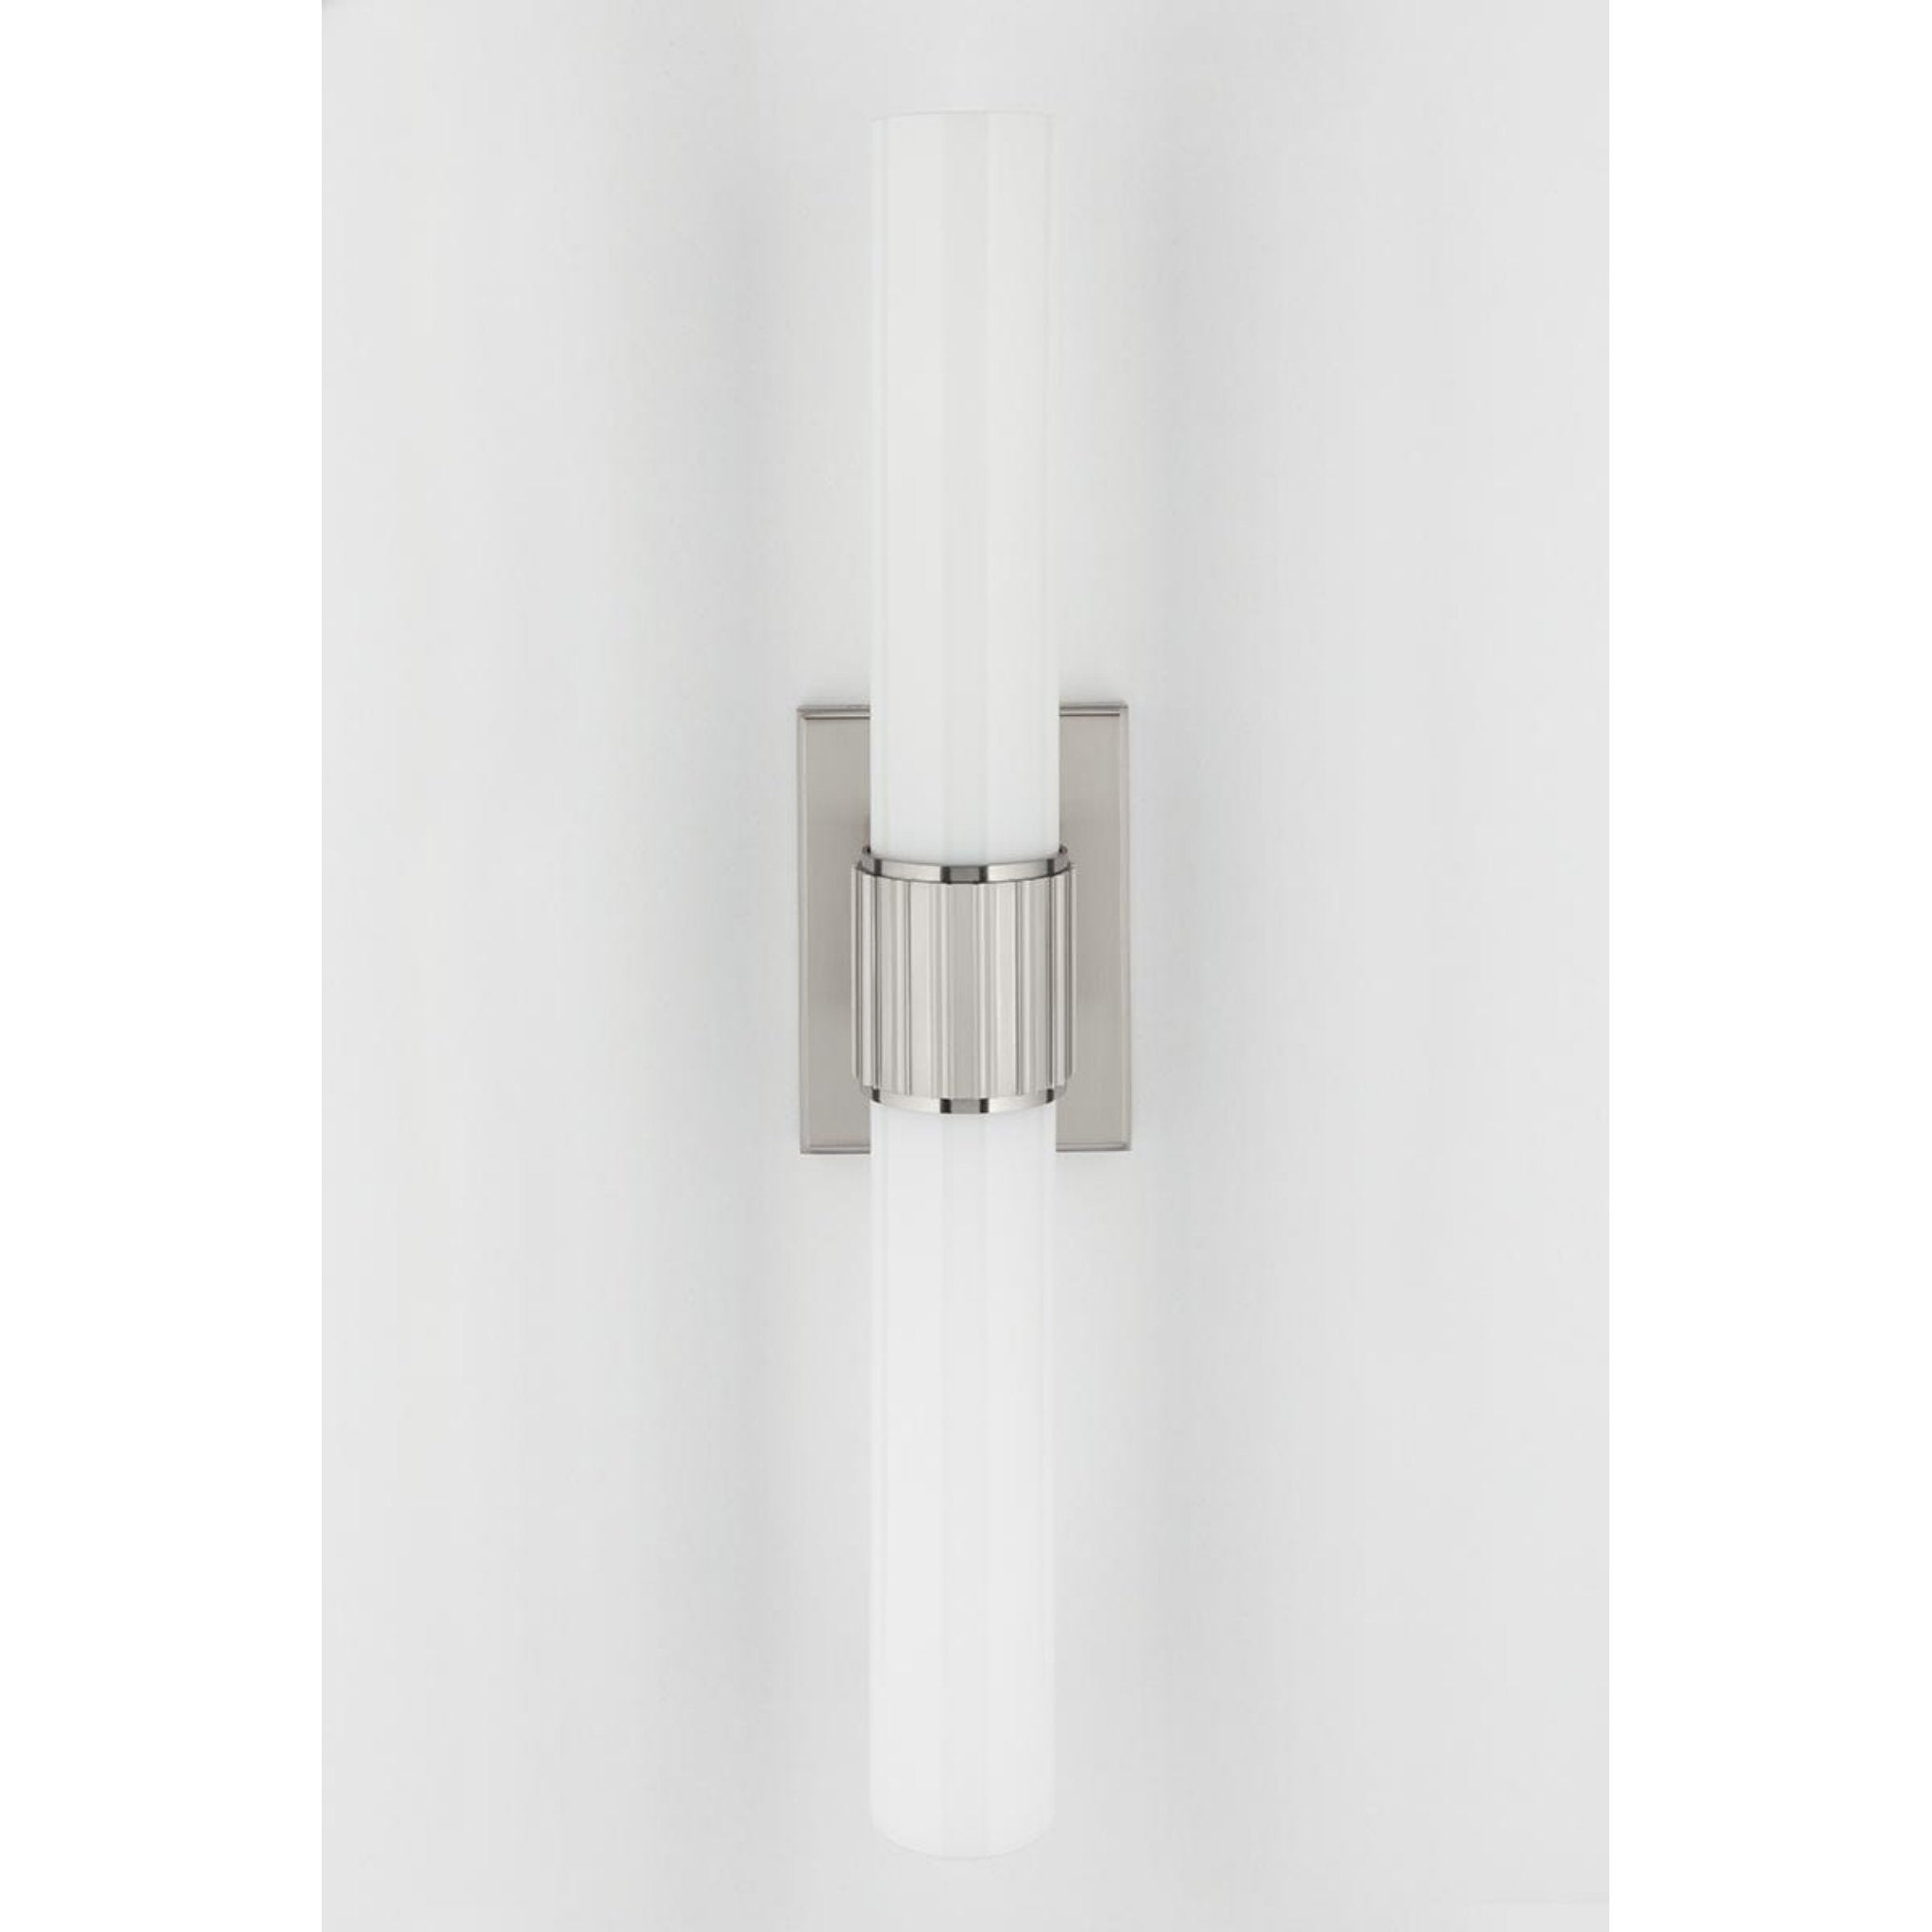 Fulton 2 Light Bath and Vanity in Polished Nickel